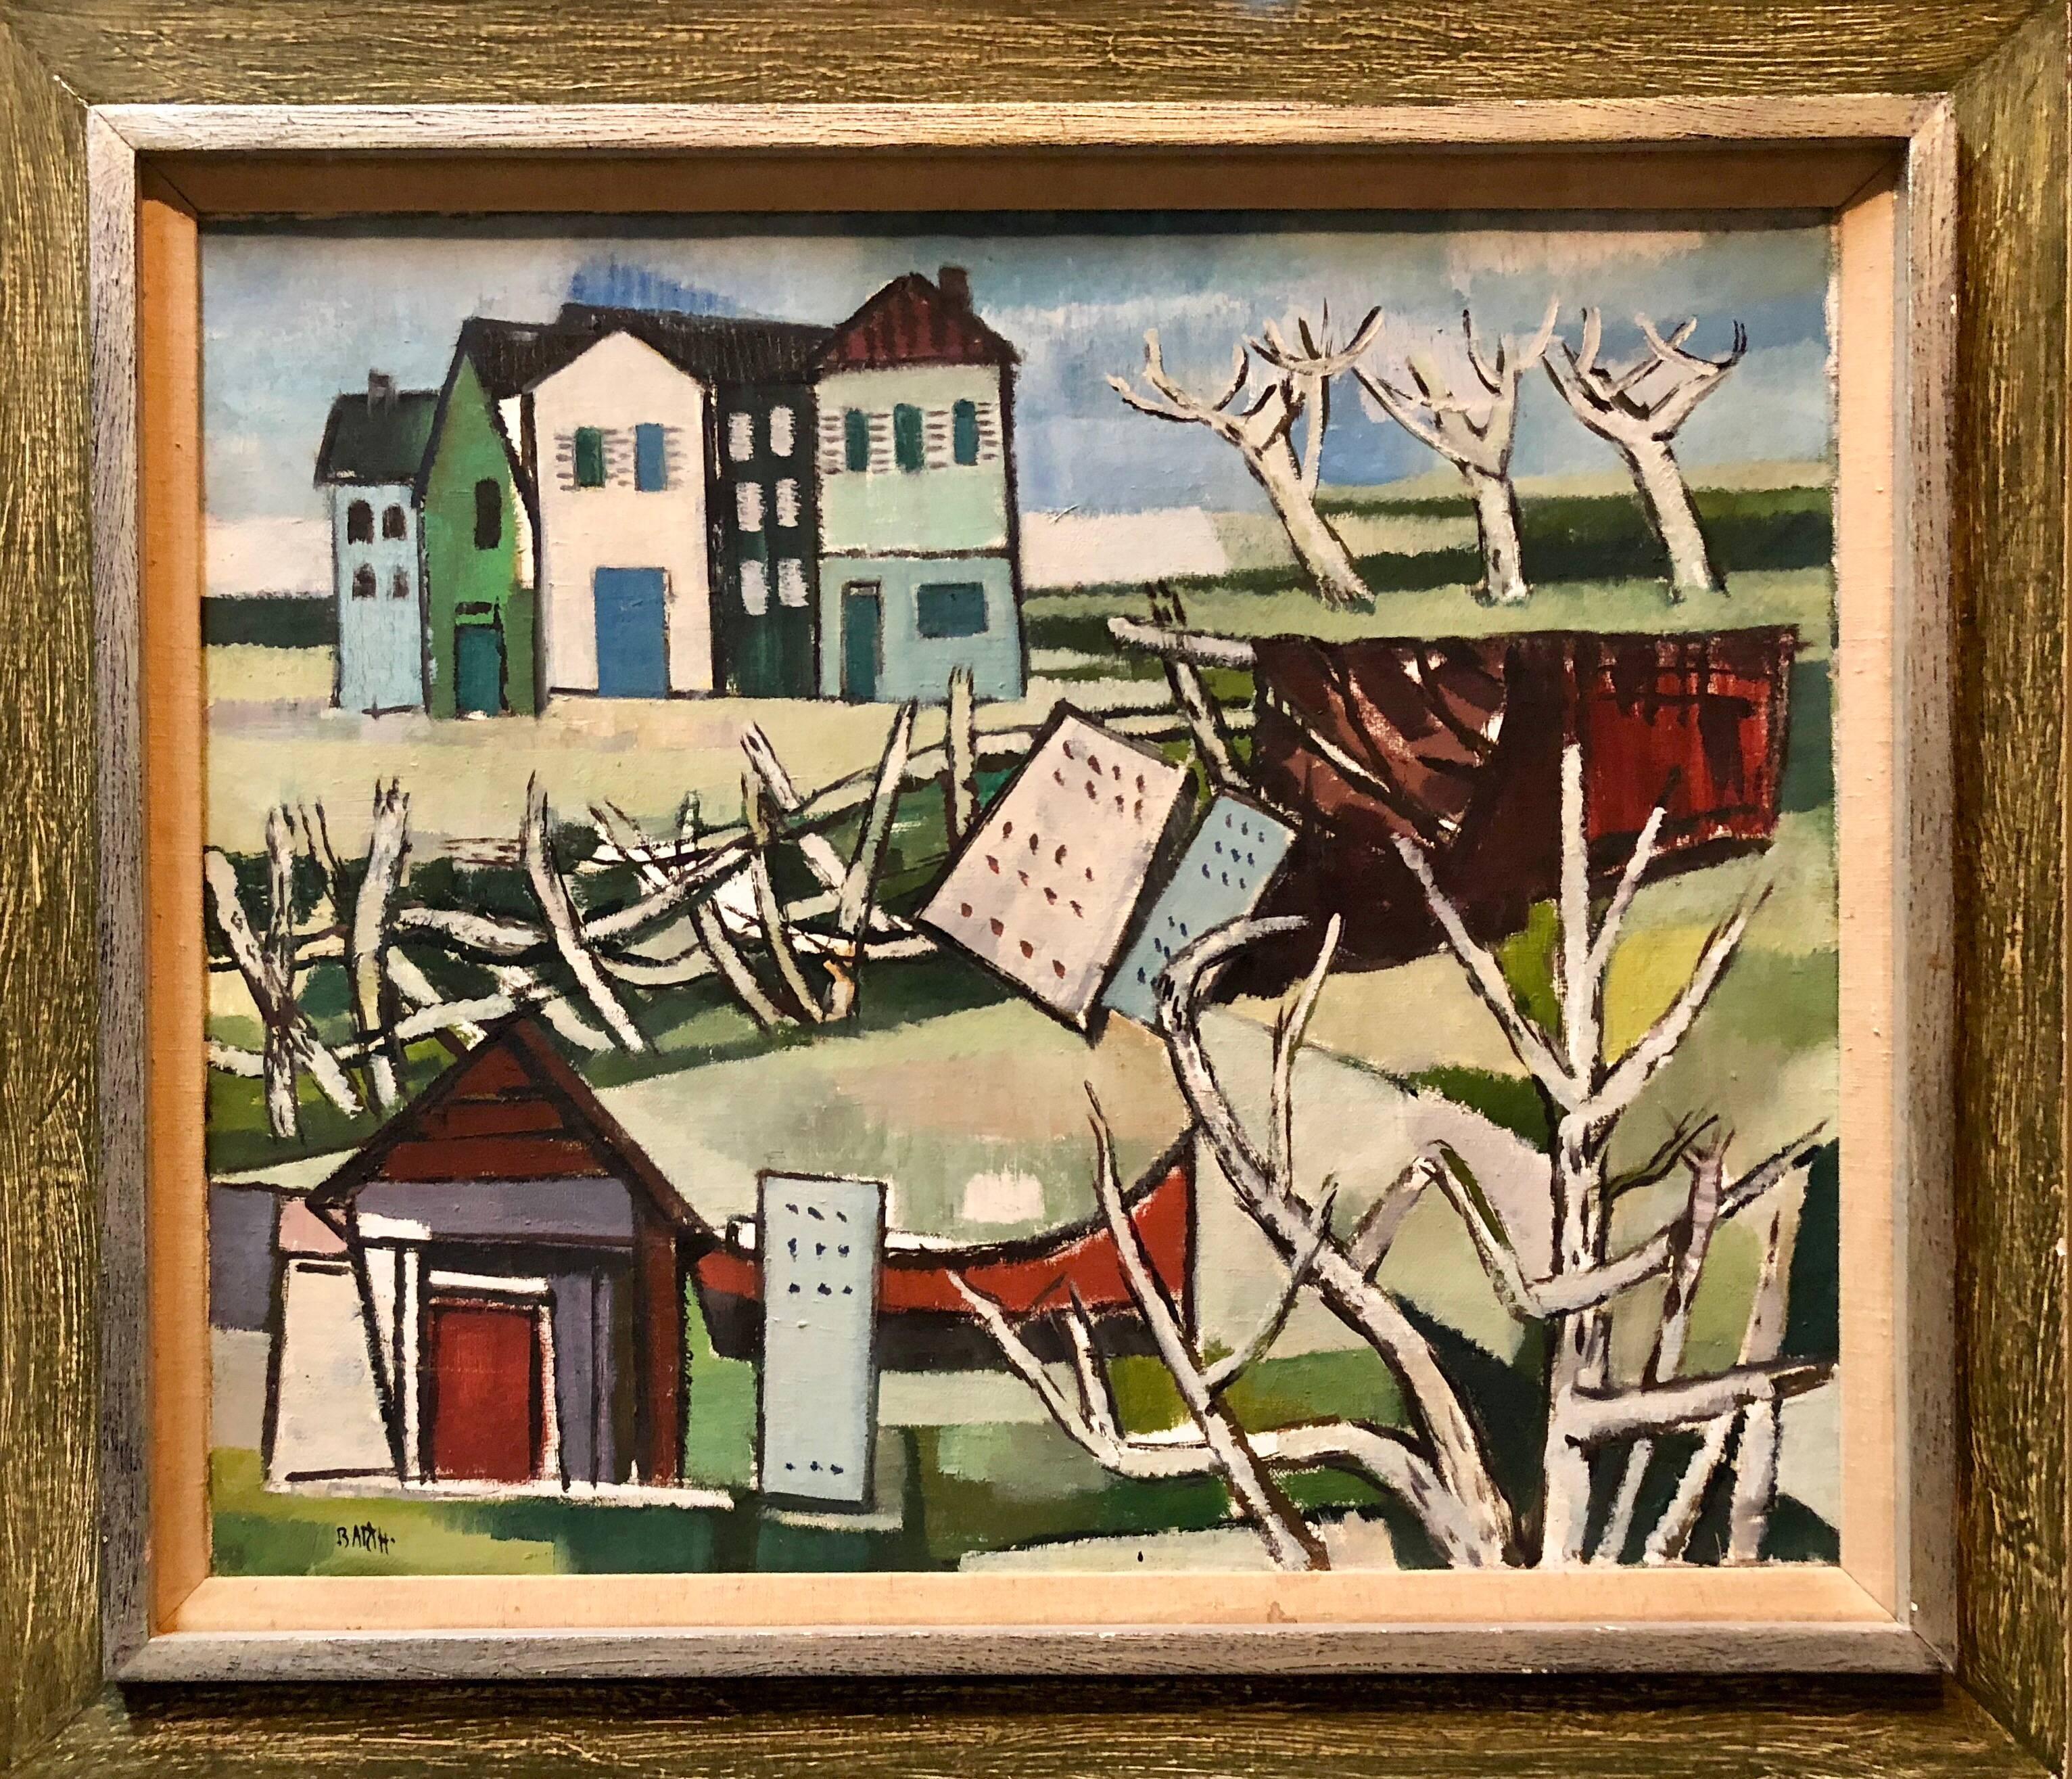 Framed oil on linen, ''Lower Rhine,'' by Carl Barth (German, 1896-1976), signed ''Barth'' lower left, bears Hearst Art Gallery, Moraga, California label verso, overall: 26''h x 30''w. Provenance: Deaccession of Hearst Art Gallery, St. Mary's